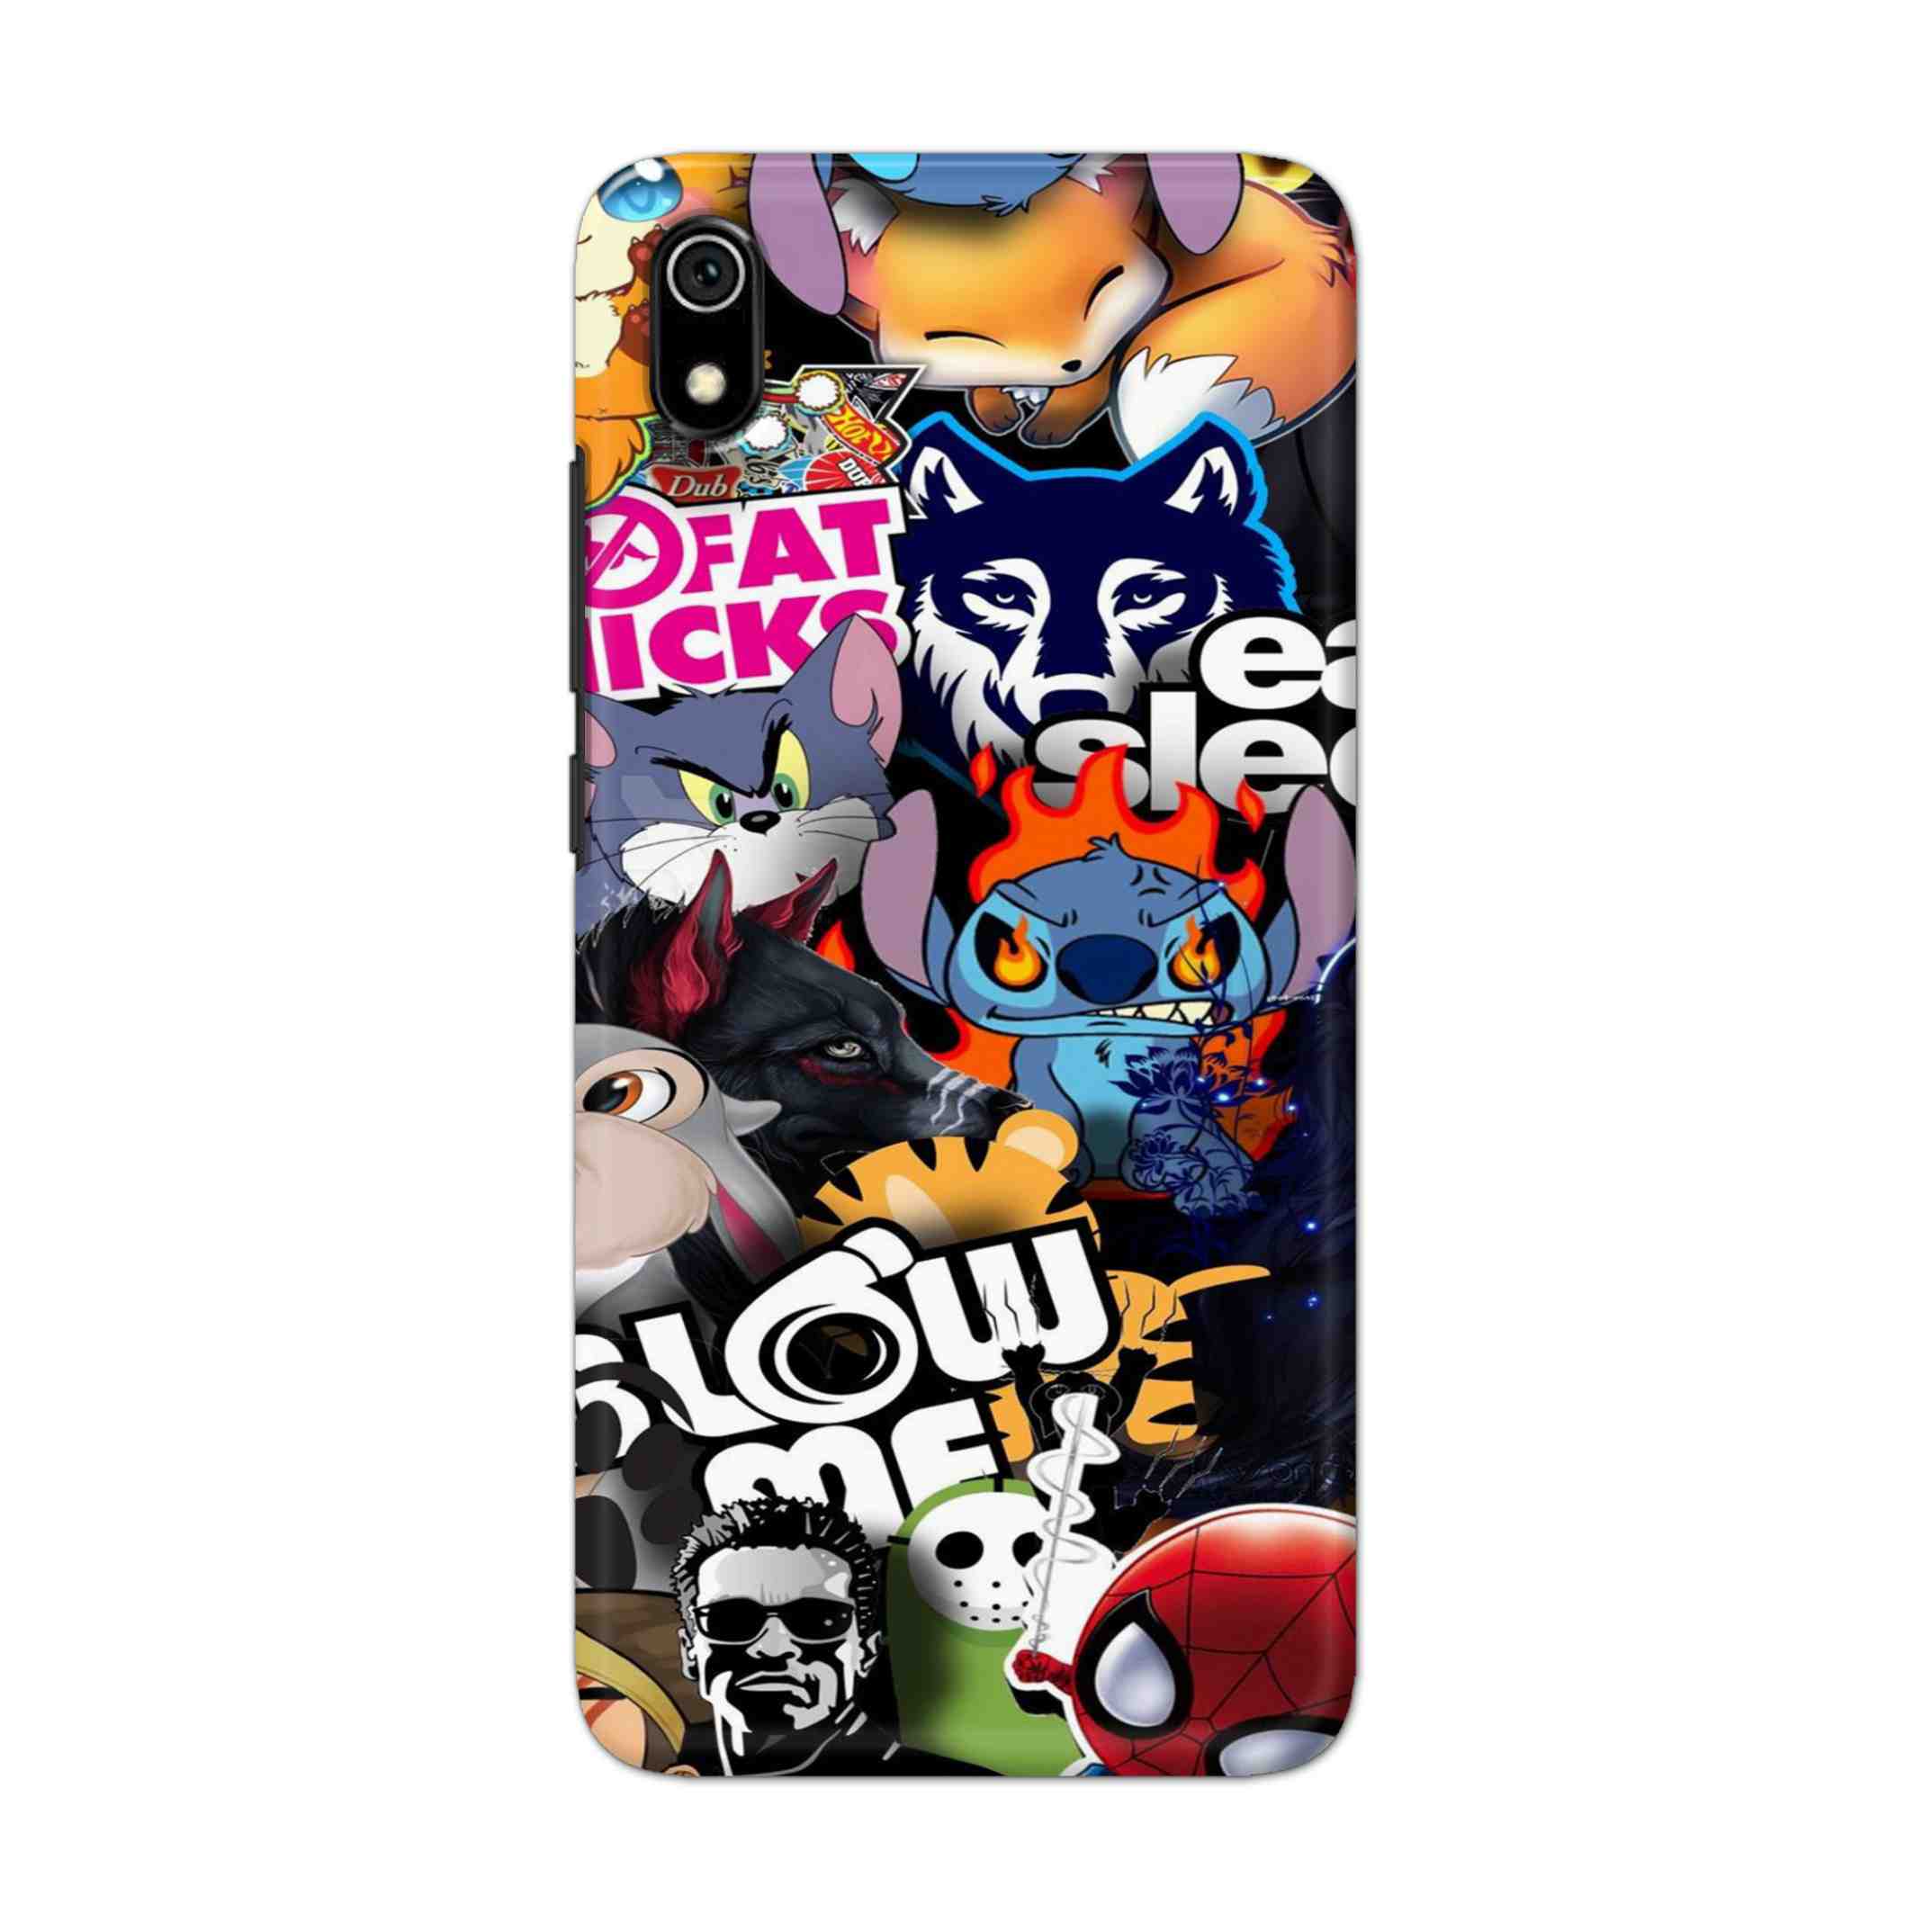 Buy Blow Me Hard Back Mobile Phone Case Cover For Xiaomi Redmi 7A Online